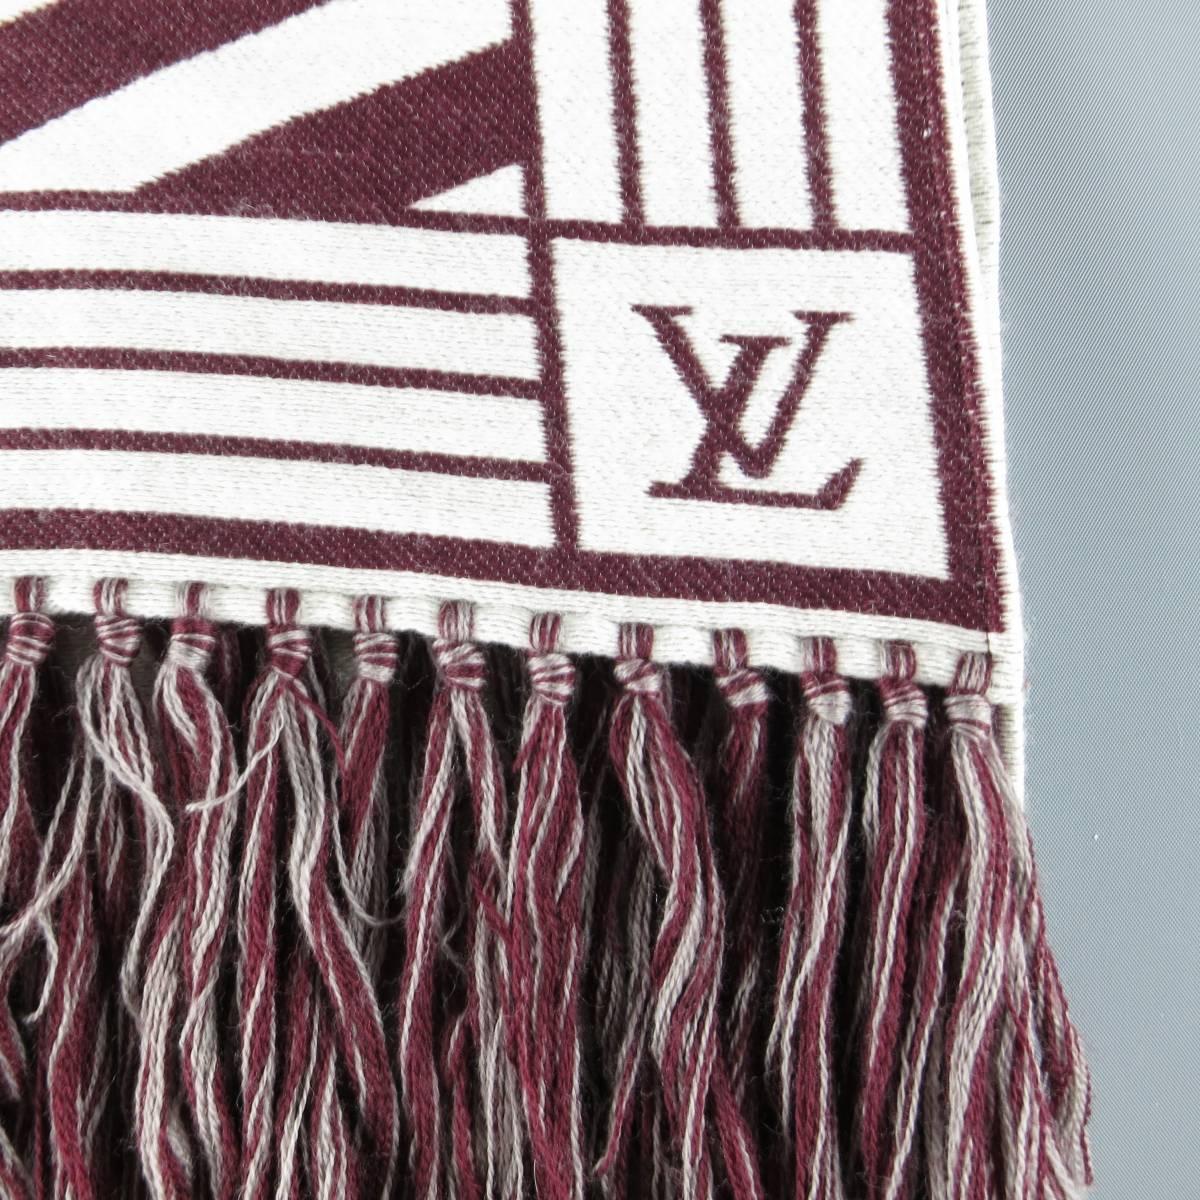 Classic rectangular Louis Vuitton scarf comes in a taupe beige and burgundy blanket print Herringbone pattern wool knit with reverse color side and fringe trim. Made in Italy.
 
Good Pre-Owned Condition.
 
Length: 70 in.
Width: 17.5 in.

SKU: 84180